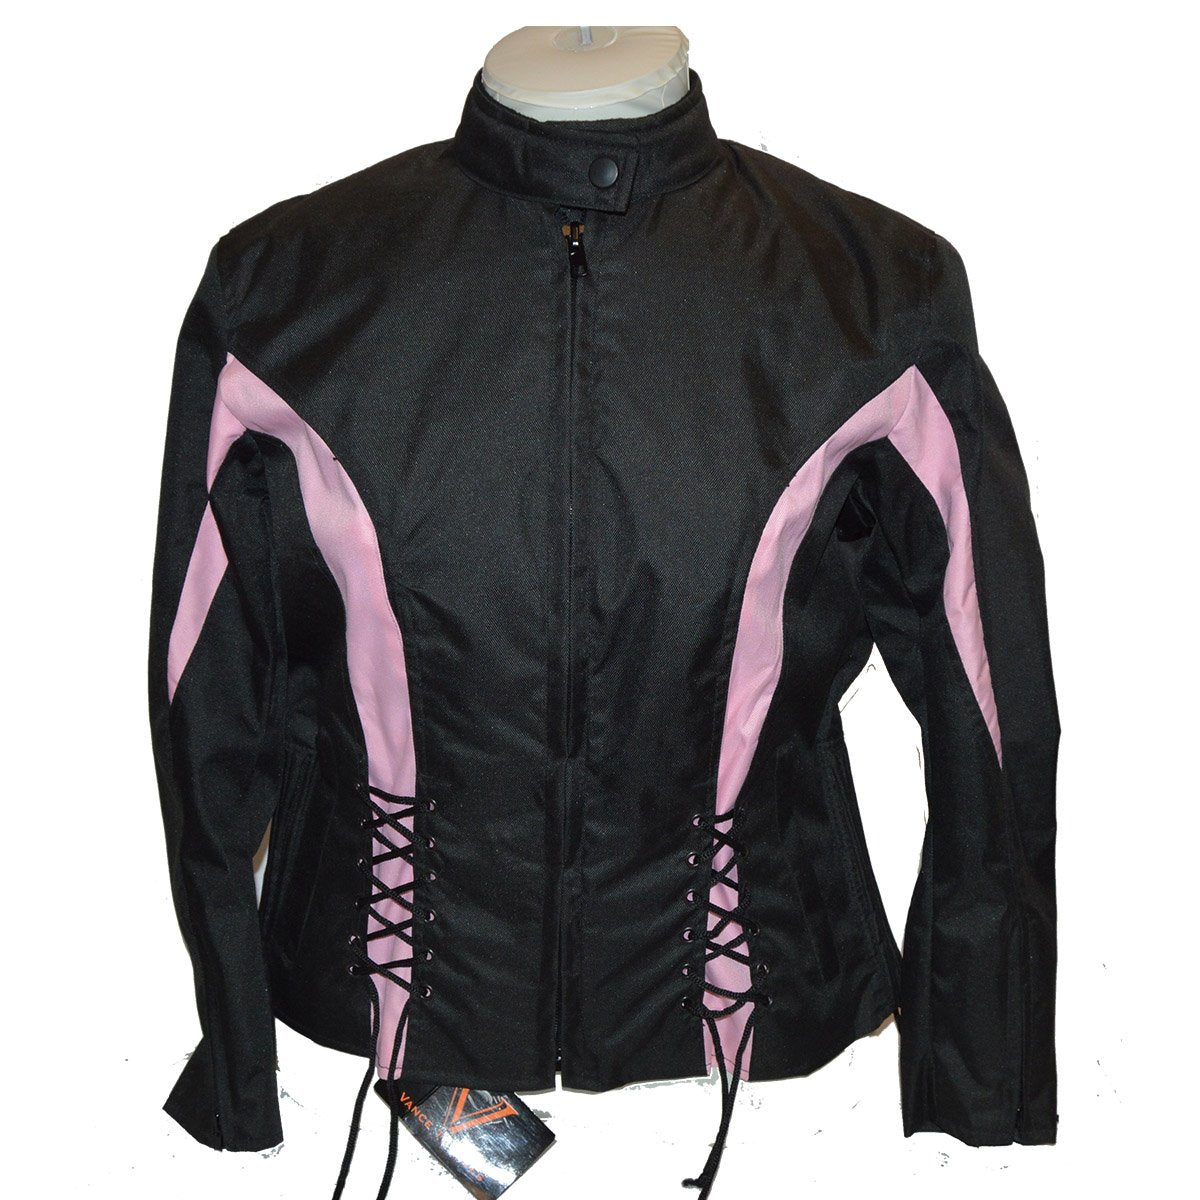 Vance Leather Ladies Textile Crystal Jacket with Color Accents